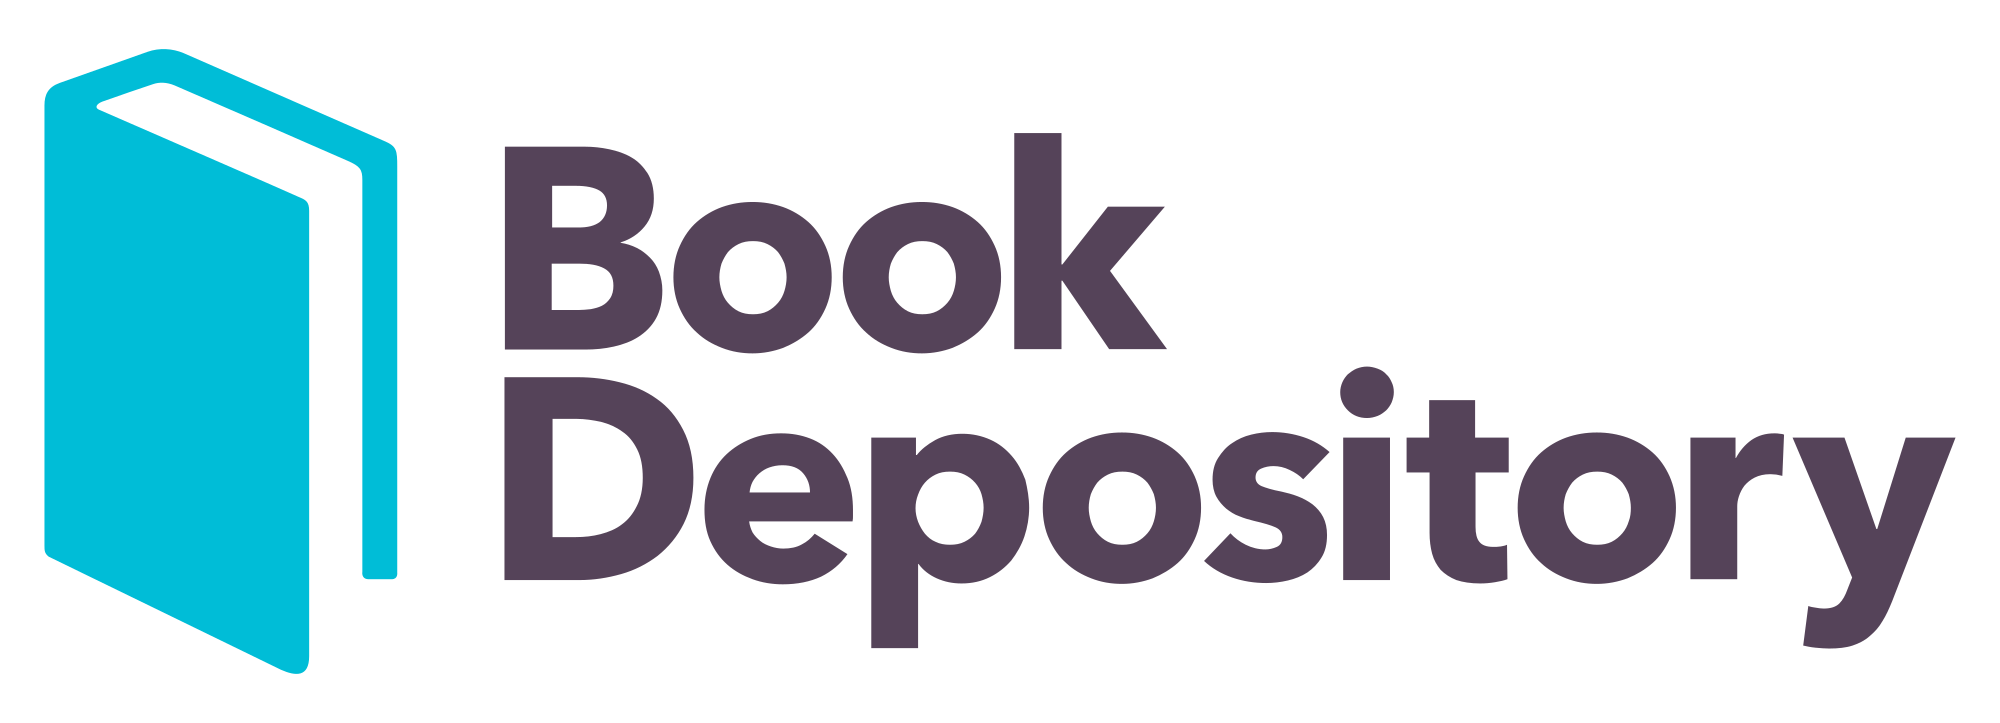 about book depository